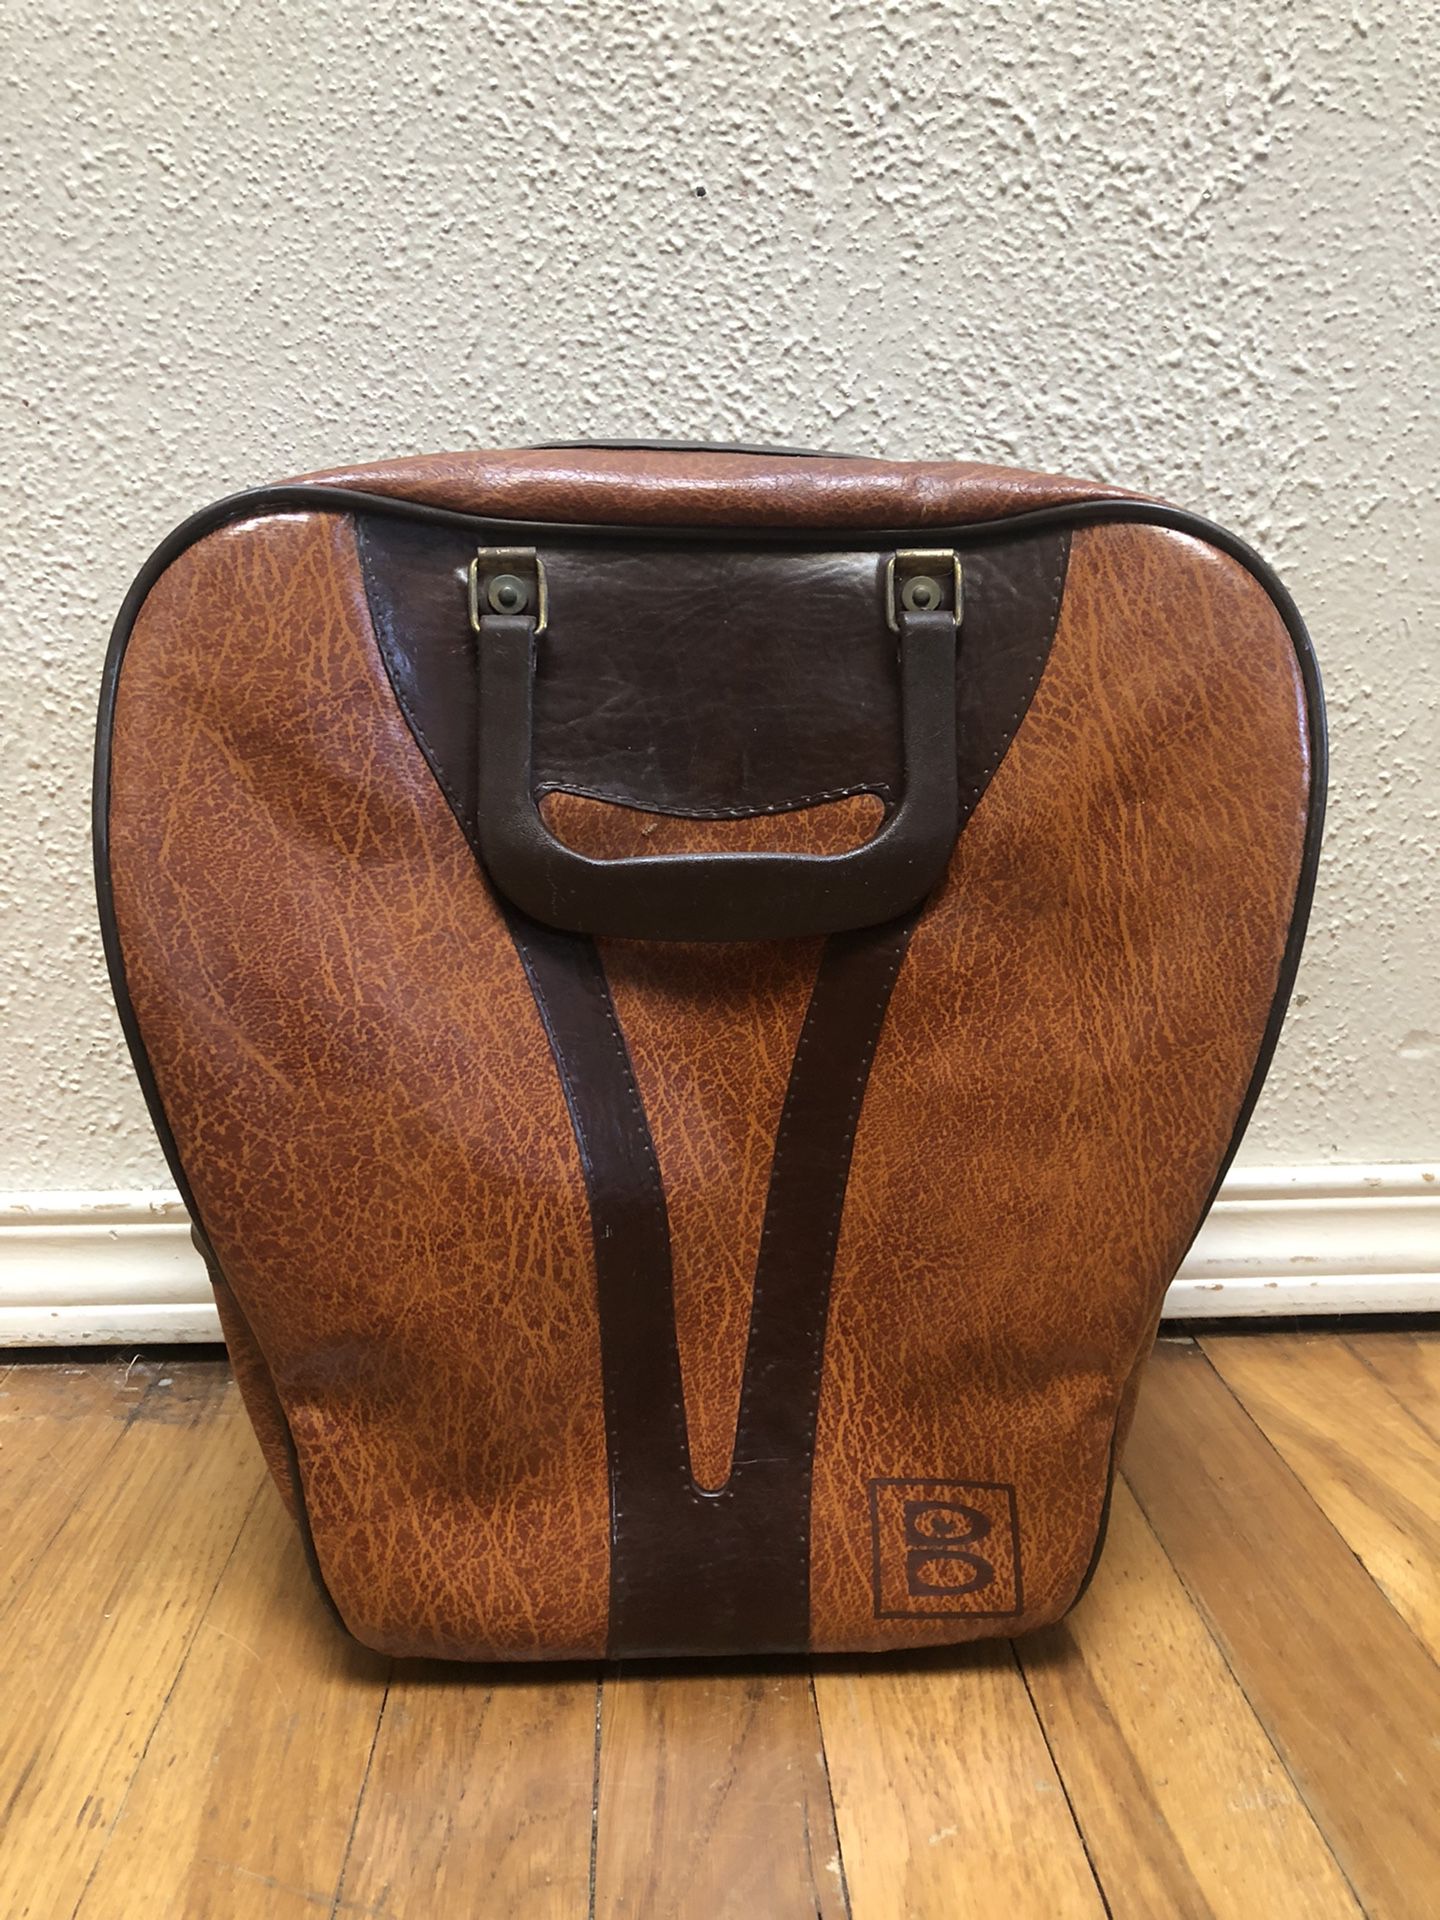 Vintage Brunswick Bowling Bag for Sale in Port Orchard, WA - OfferUp